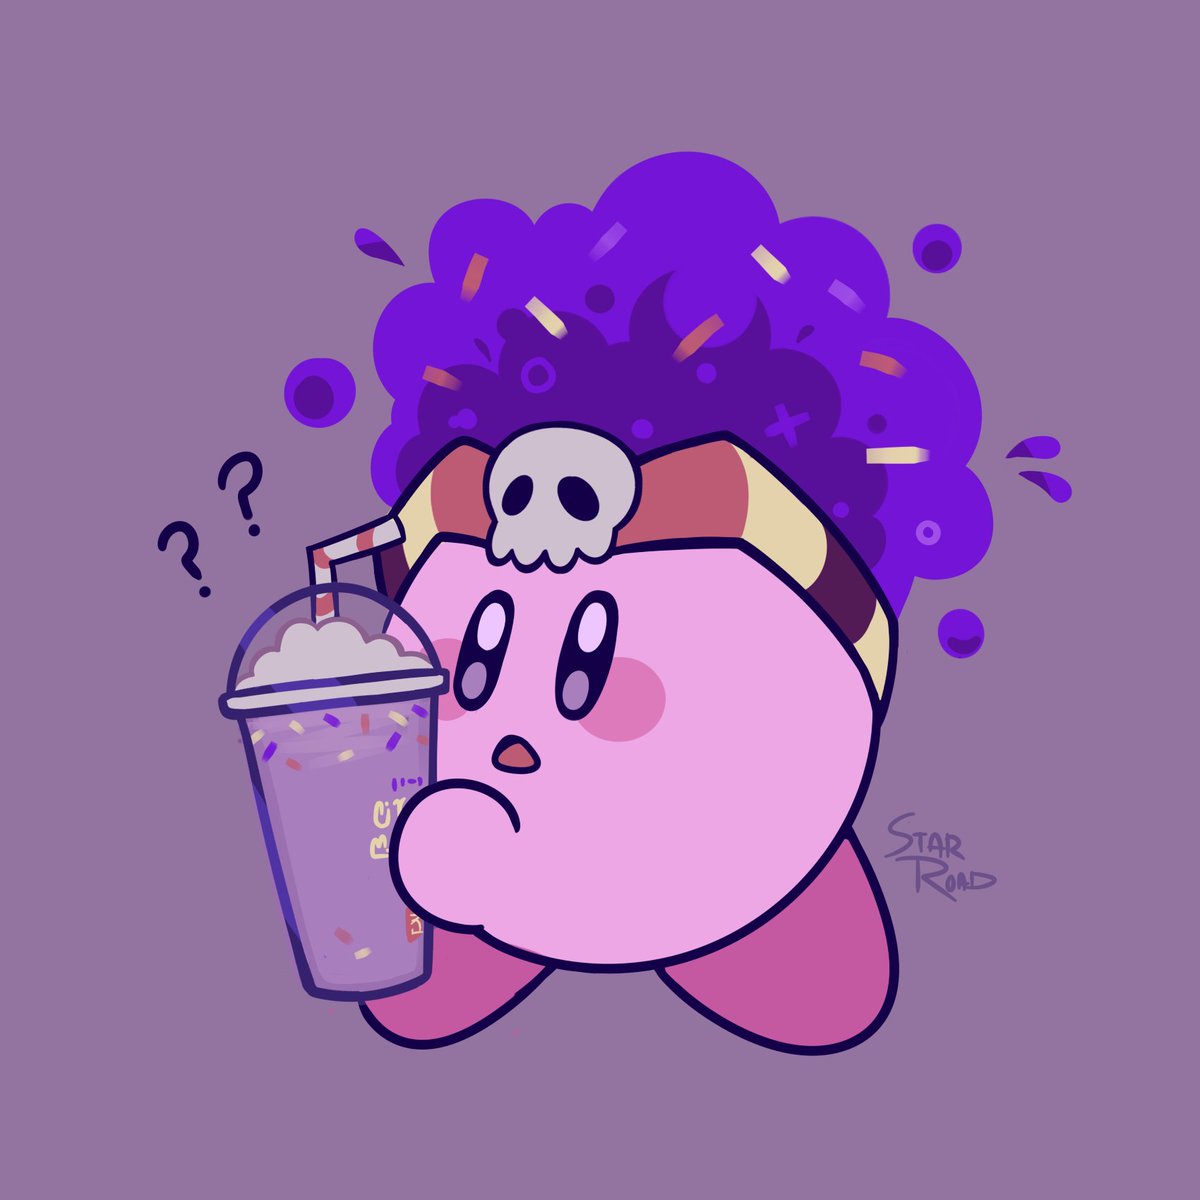 What happened? 🔮
#GrimacesBirthday #kirby